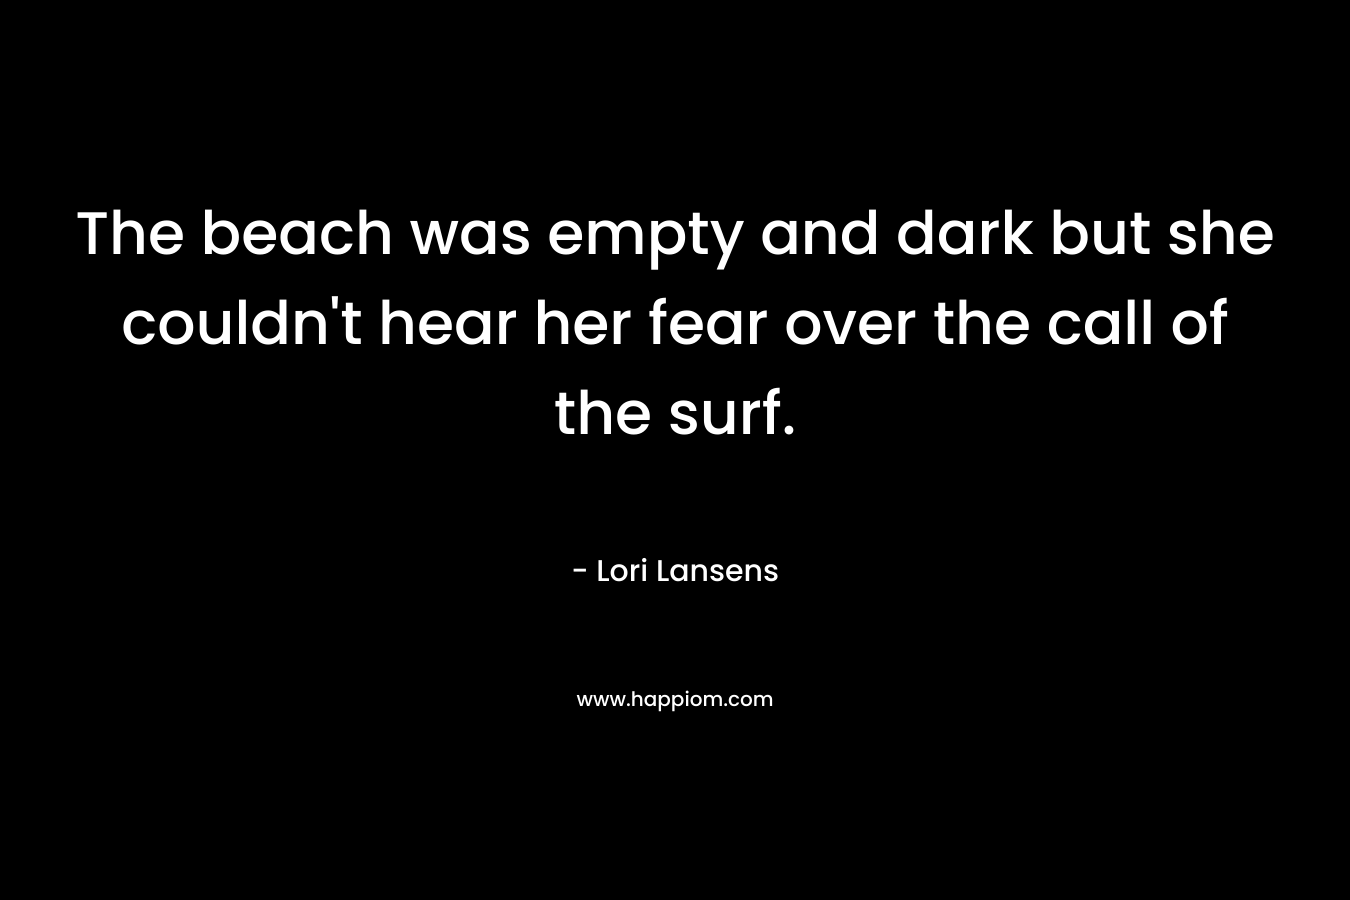 The beach was empty and dark but she couldn’t hear her fear over the call of the surf. – Lori Lansens